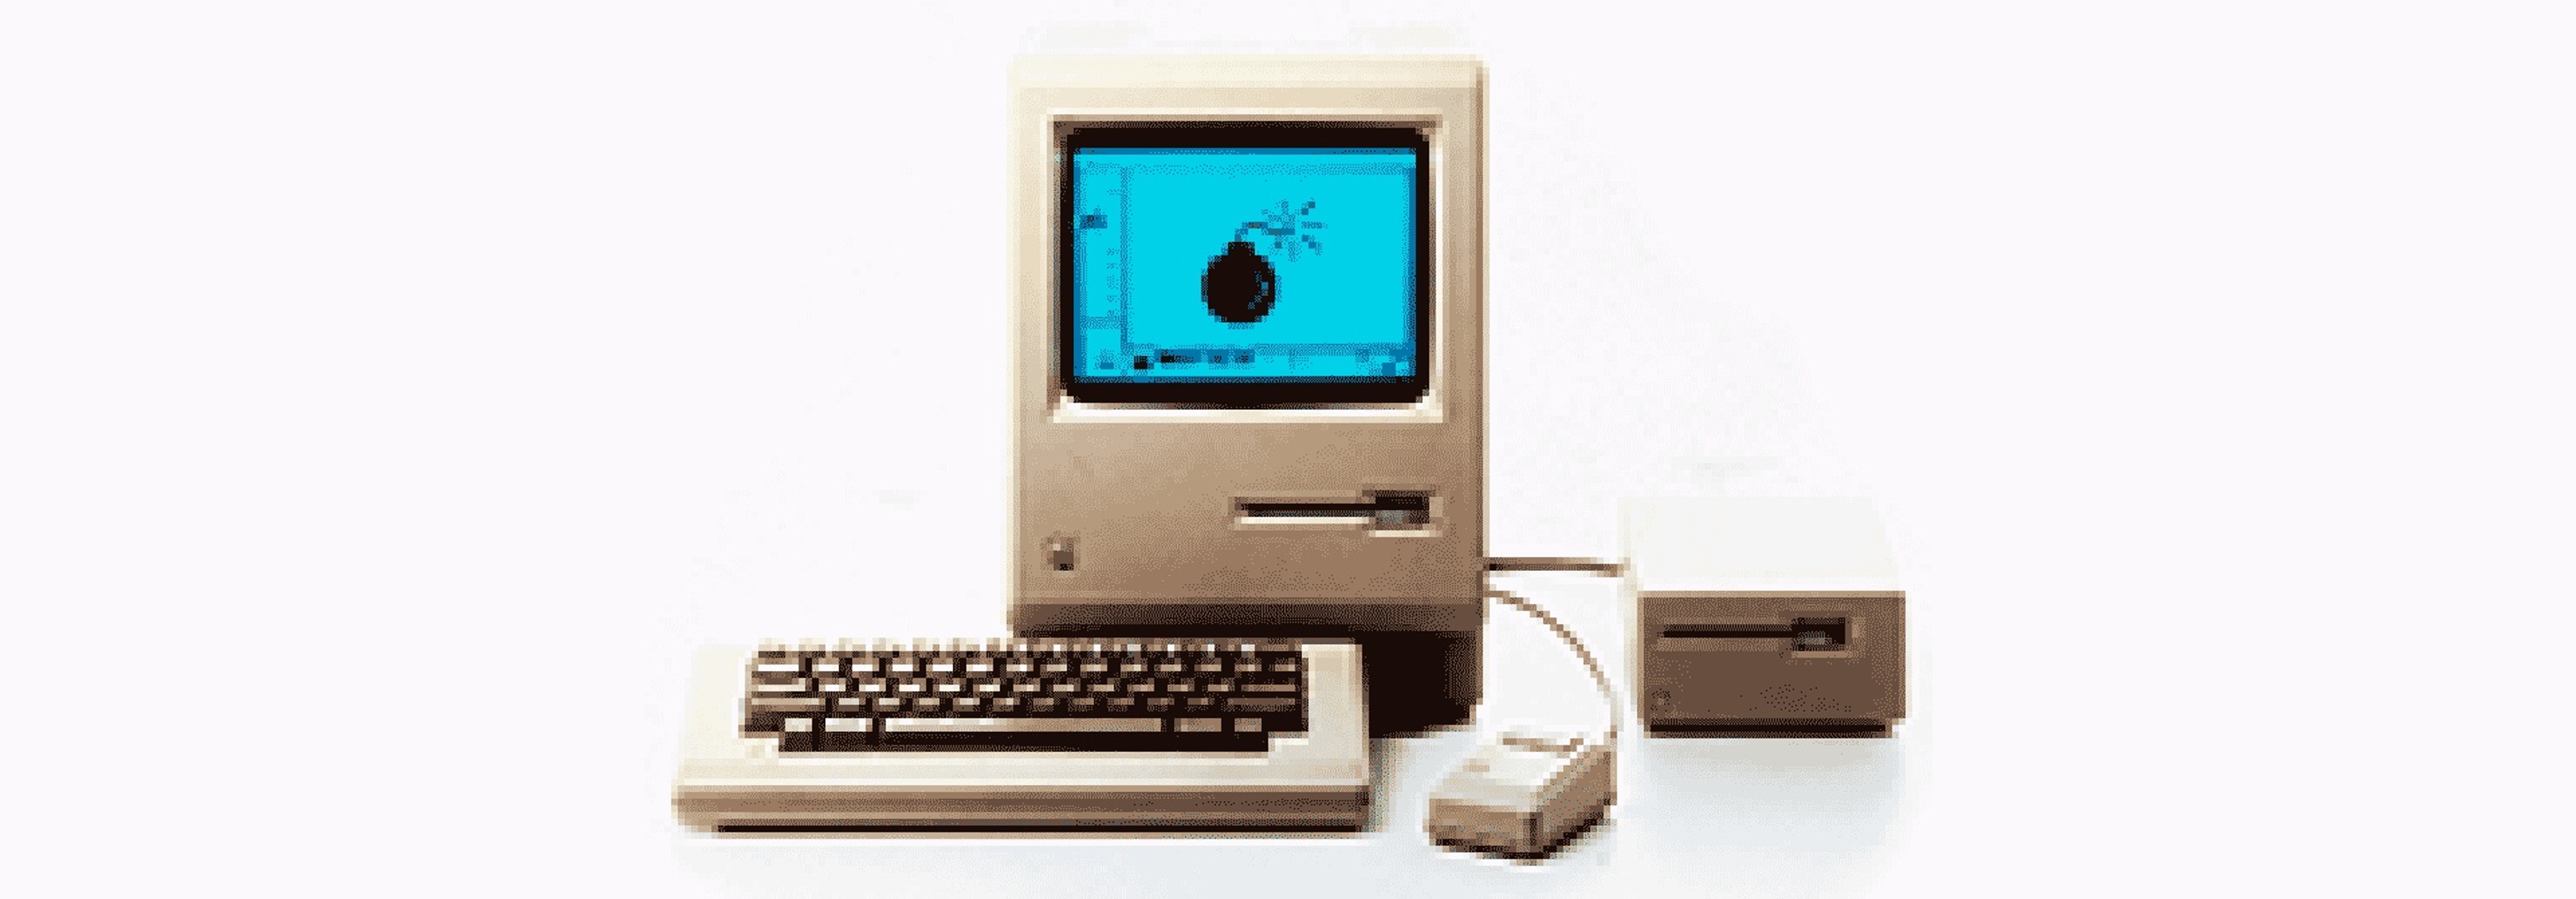 A 1984 Macintosh computer with mouse and floppy drive